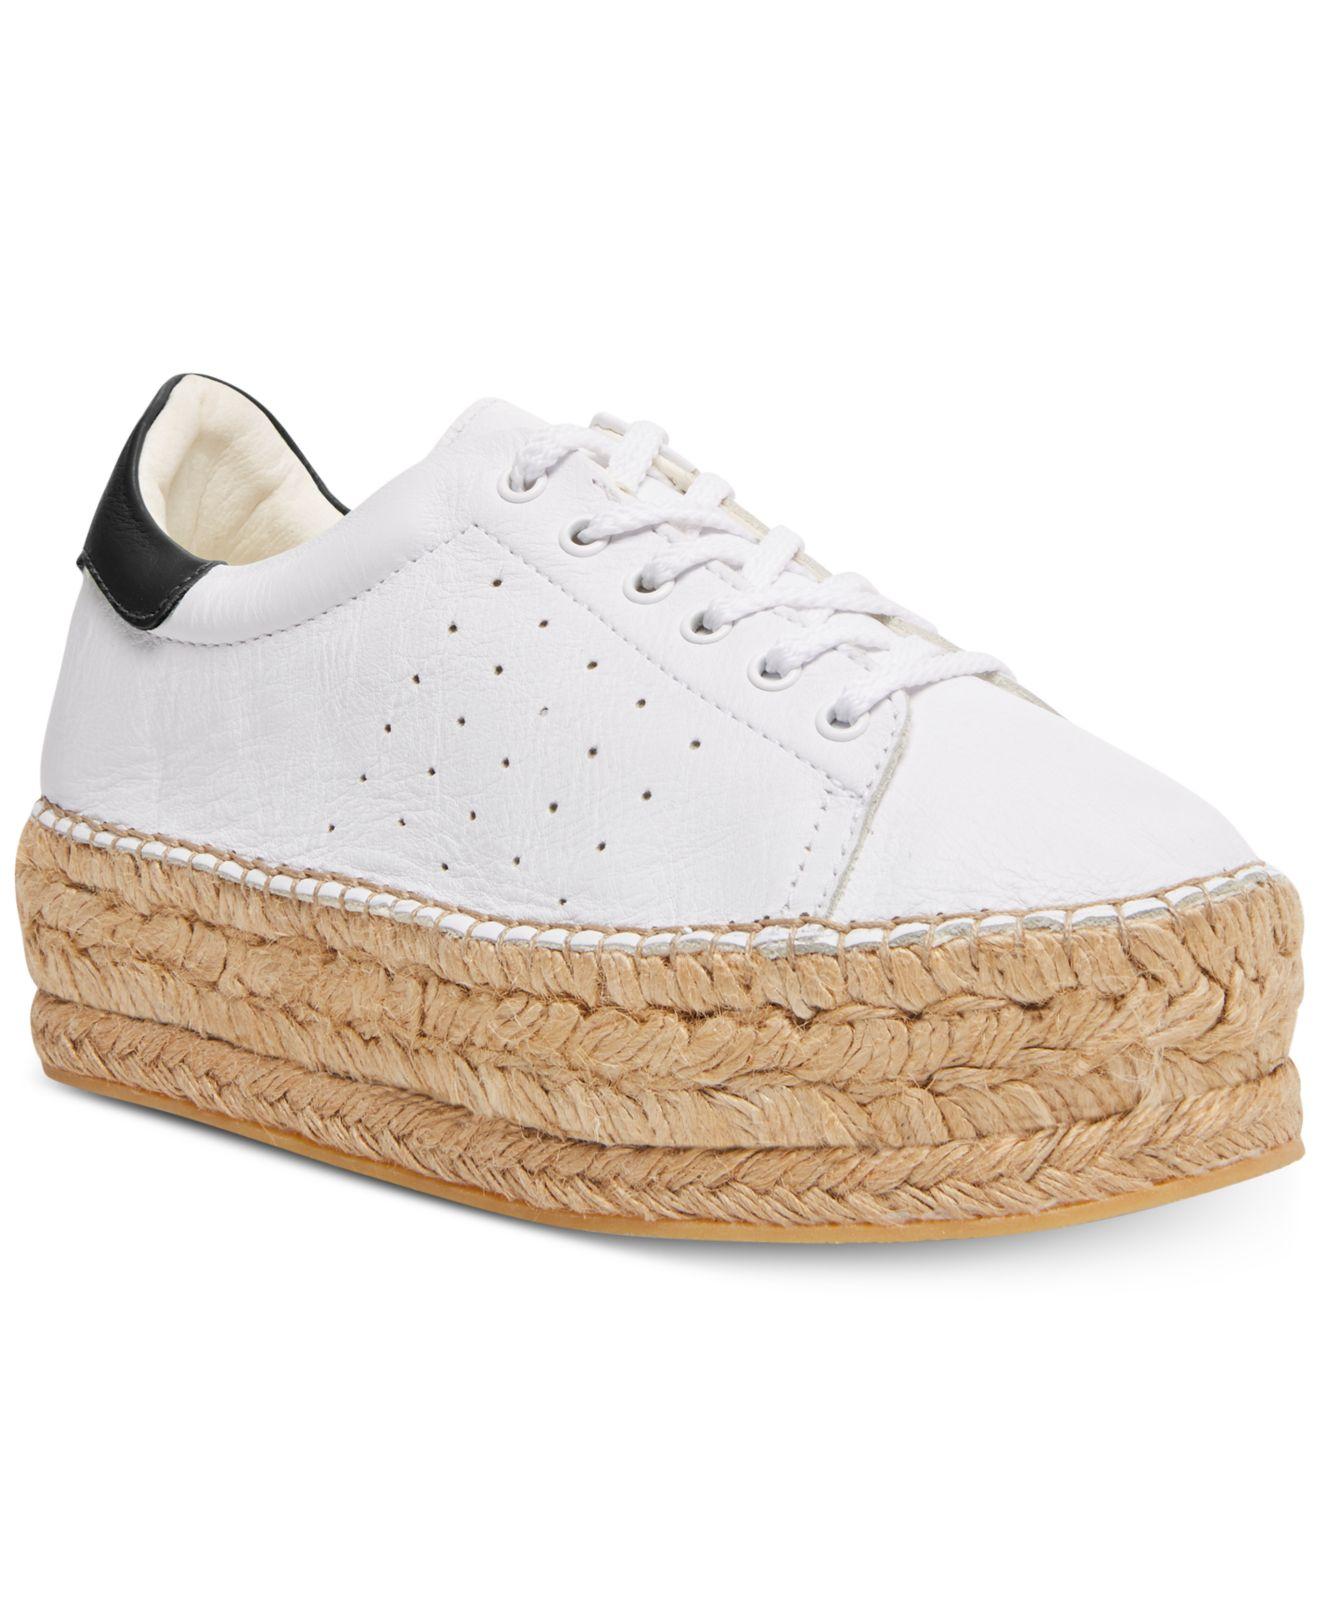 Steve Madden Parade Espadrille Platform Sneakers in White - Save 44% - Lyst